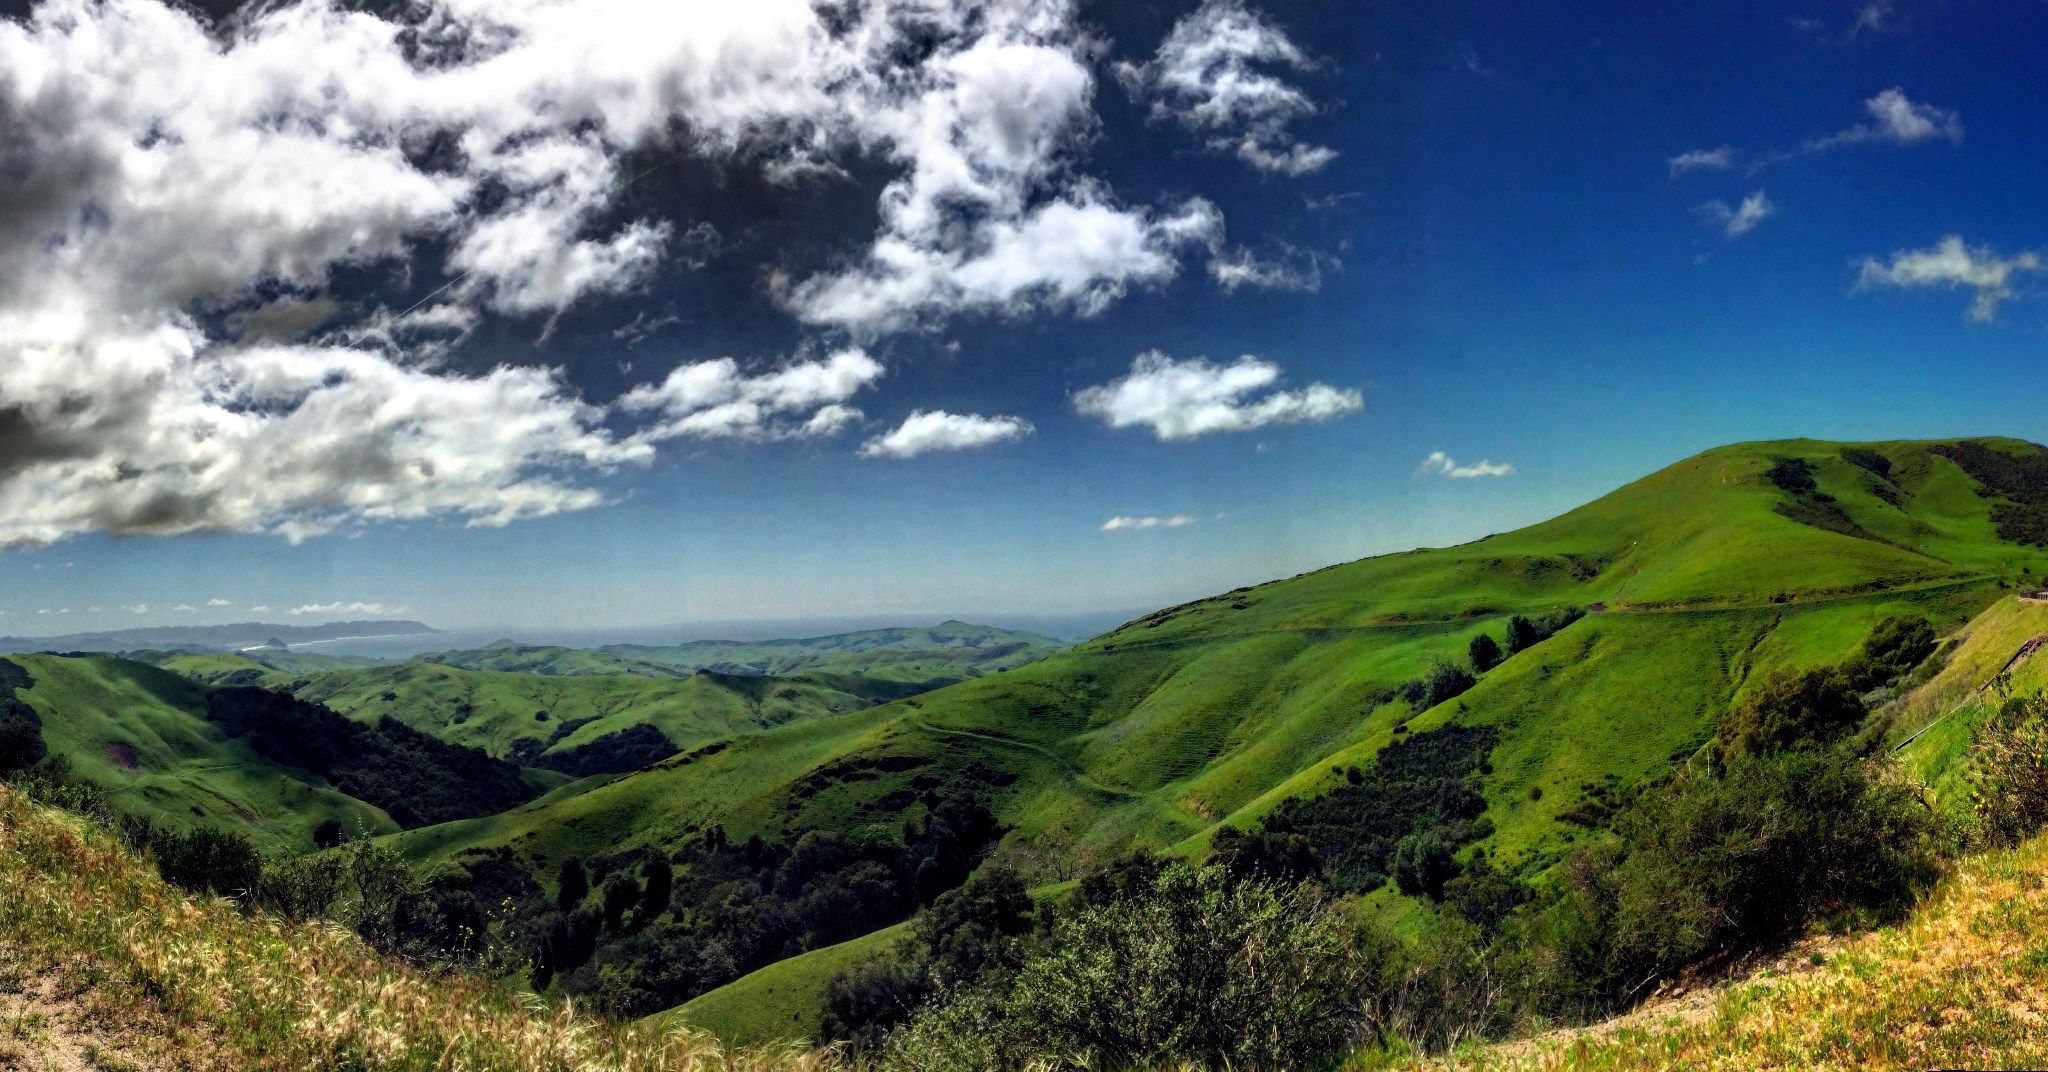 Emerald green hills on the way to Cambria. Photo by Giovanna Woods